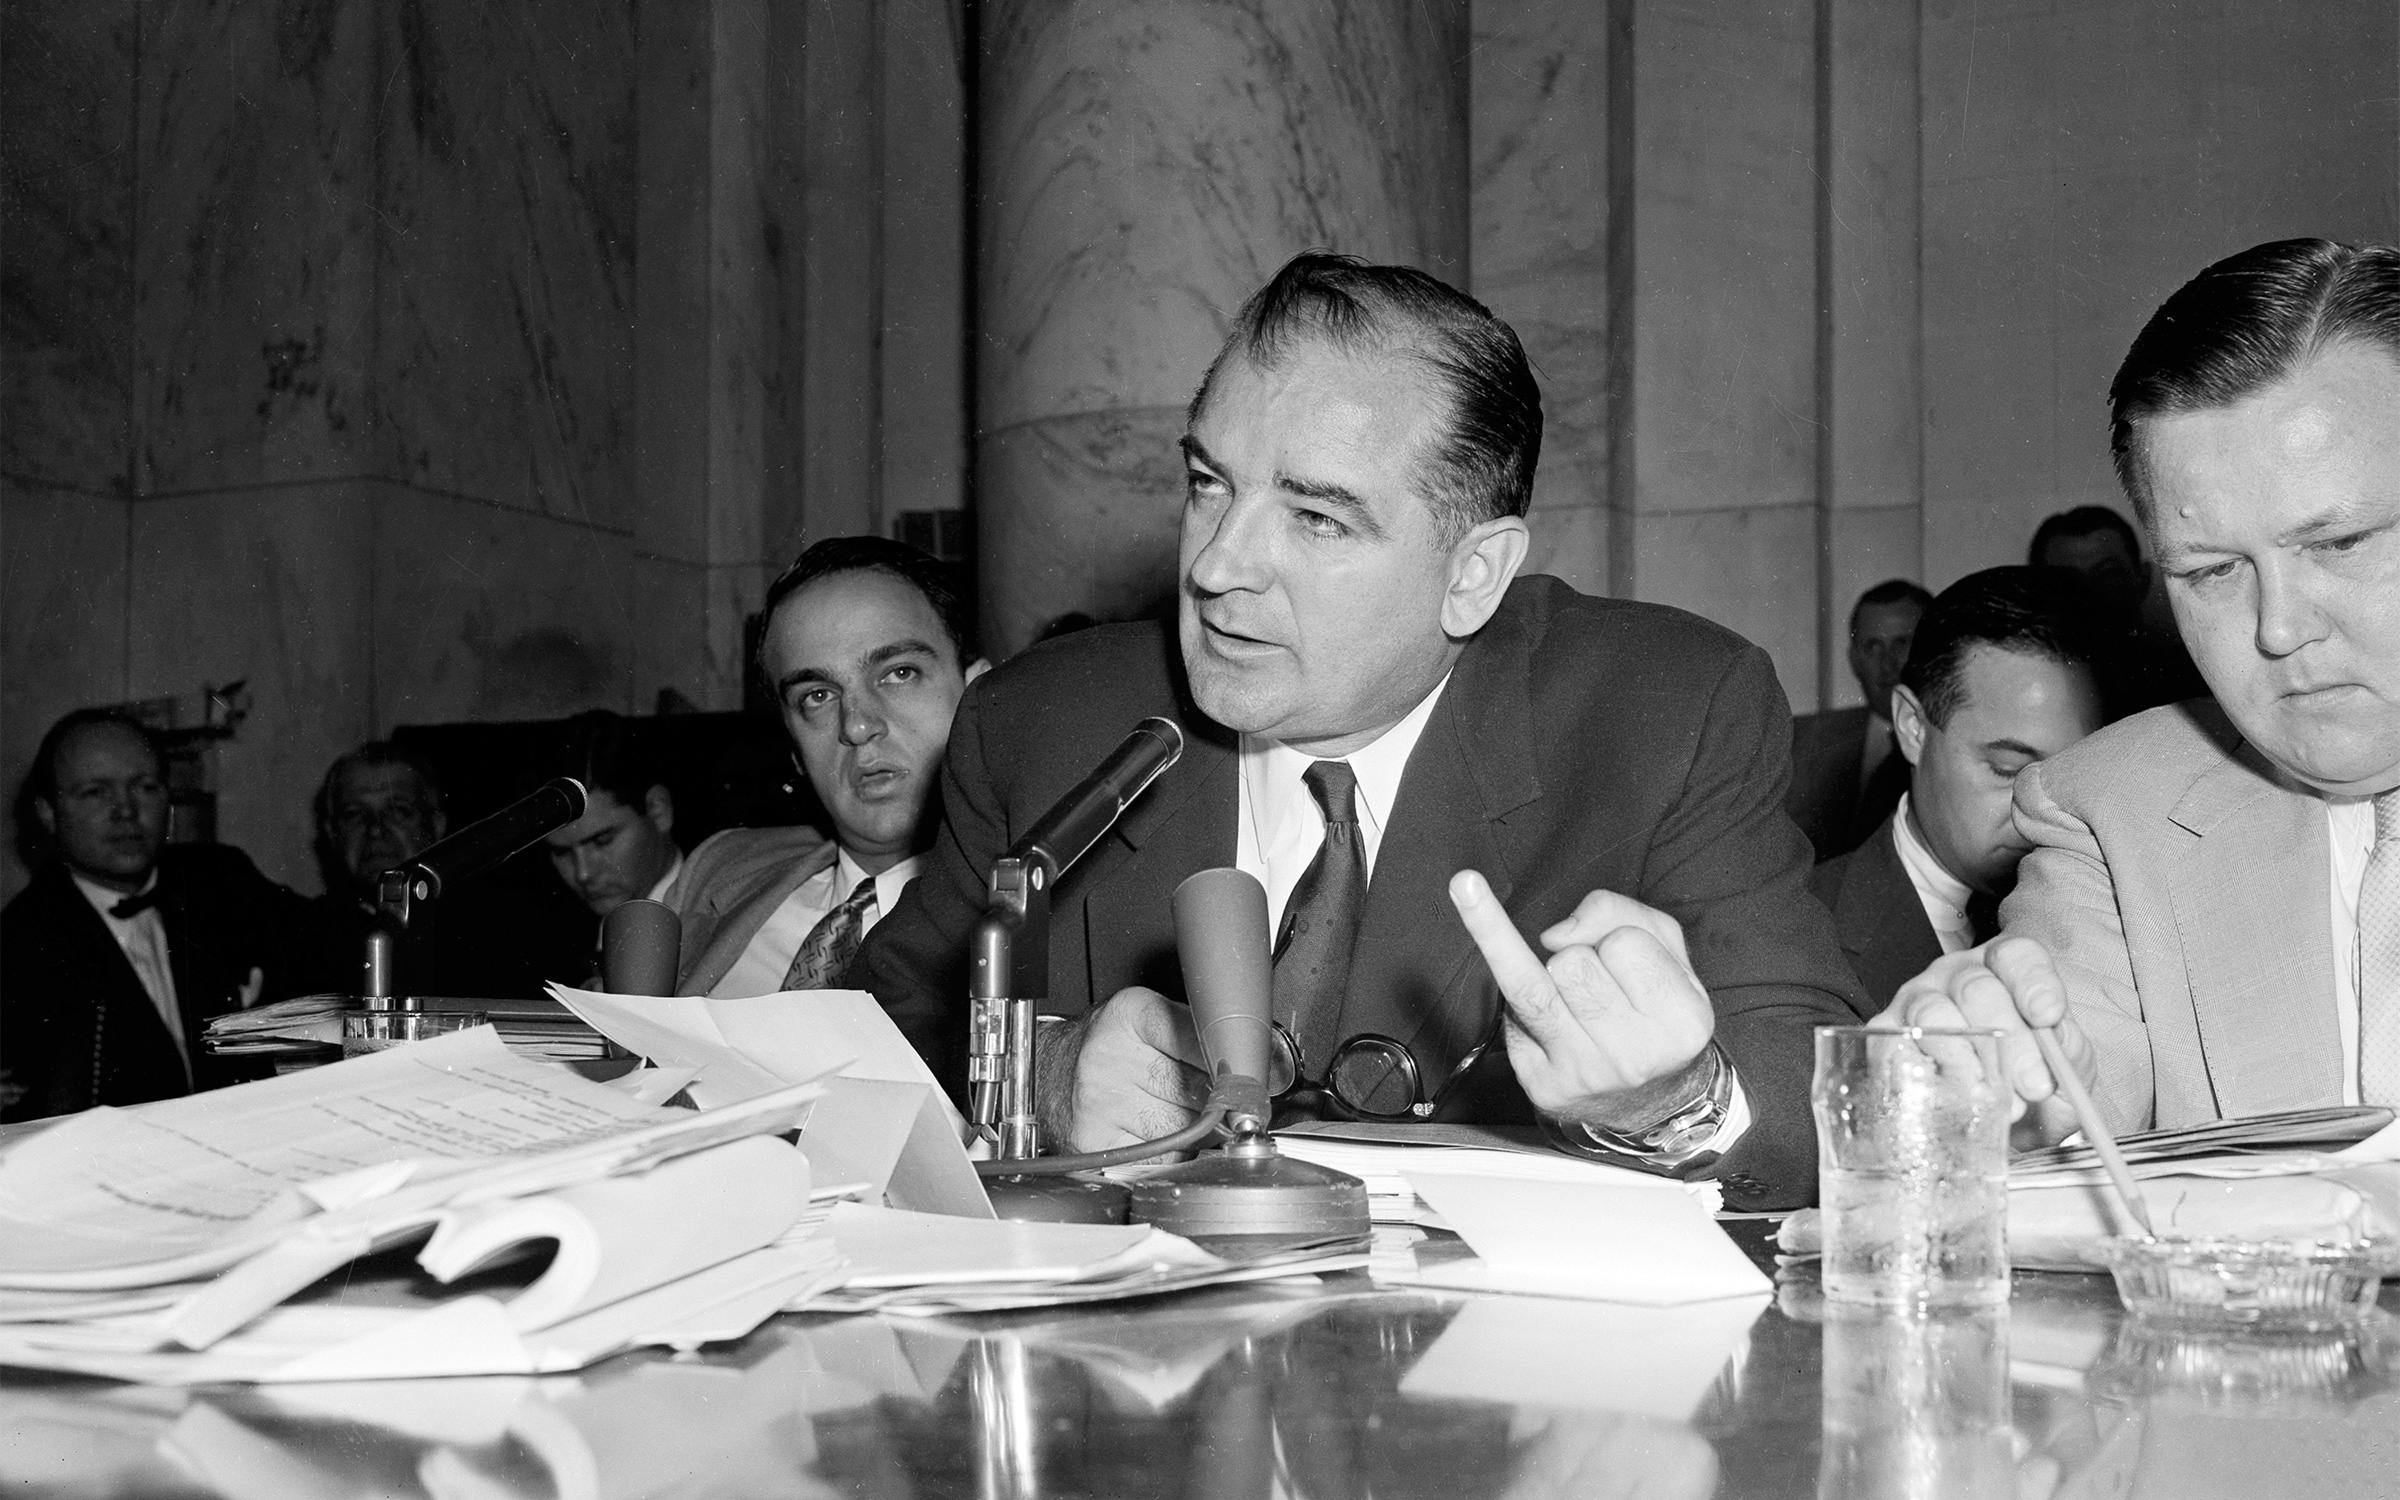 Sen. Joseph McCarthy gestures as he directs a question to Army Secretary Robert Stevens during the afternoon session of the hearings into his differences with high Pentagon officials, in Washington, D.C., on April 28, 1954. McCarthy's aide, Roy Cohn, is at left.